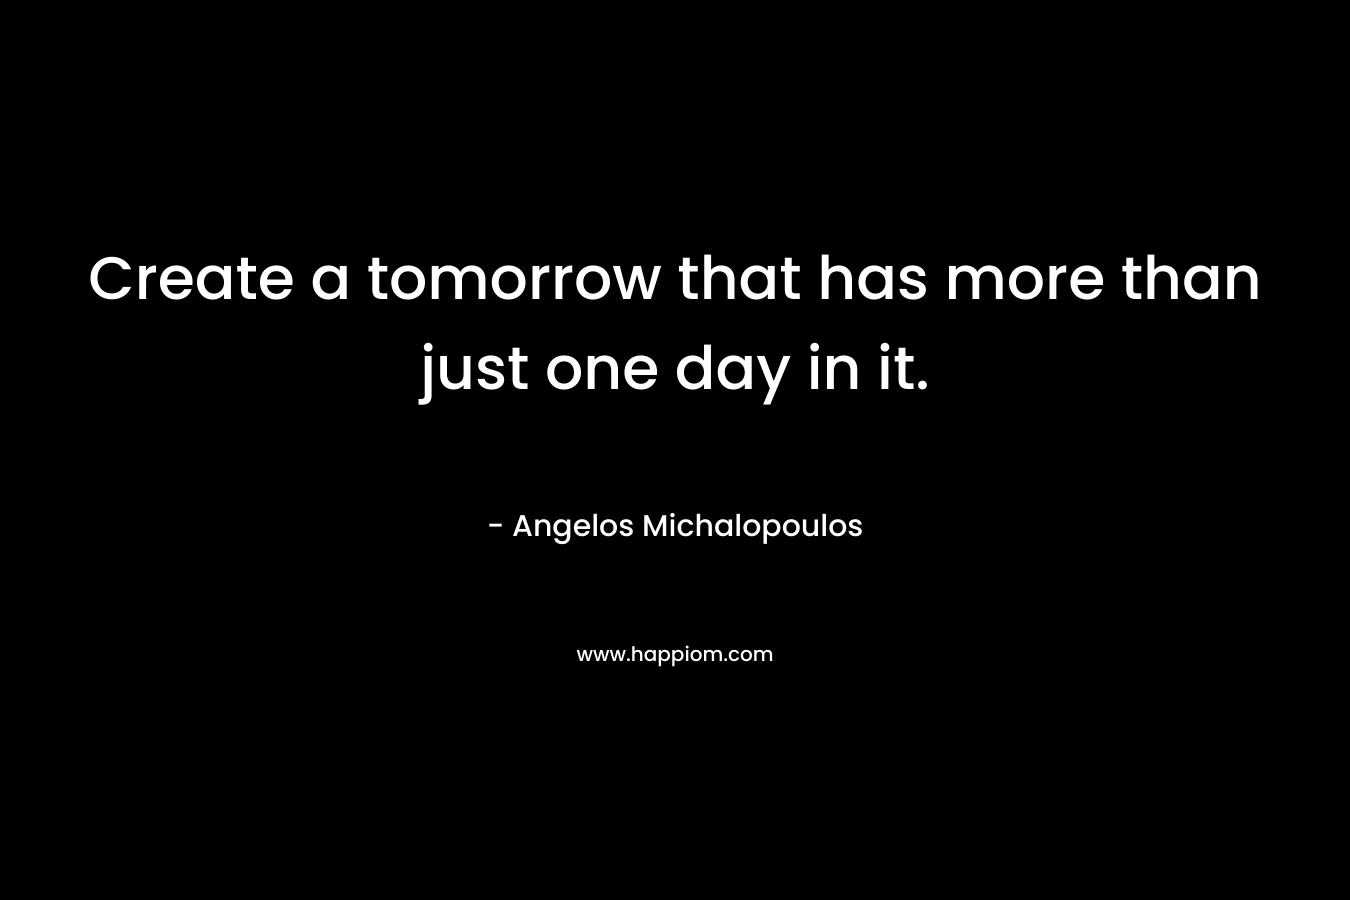 Create a tomorrow that has more than just one day in it.